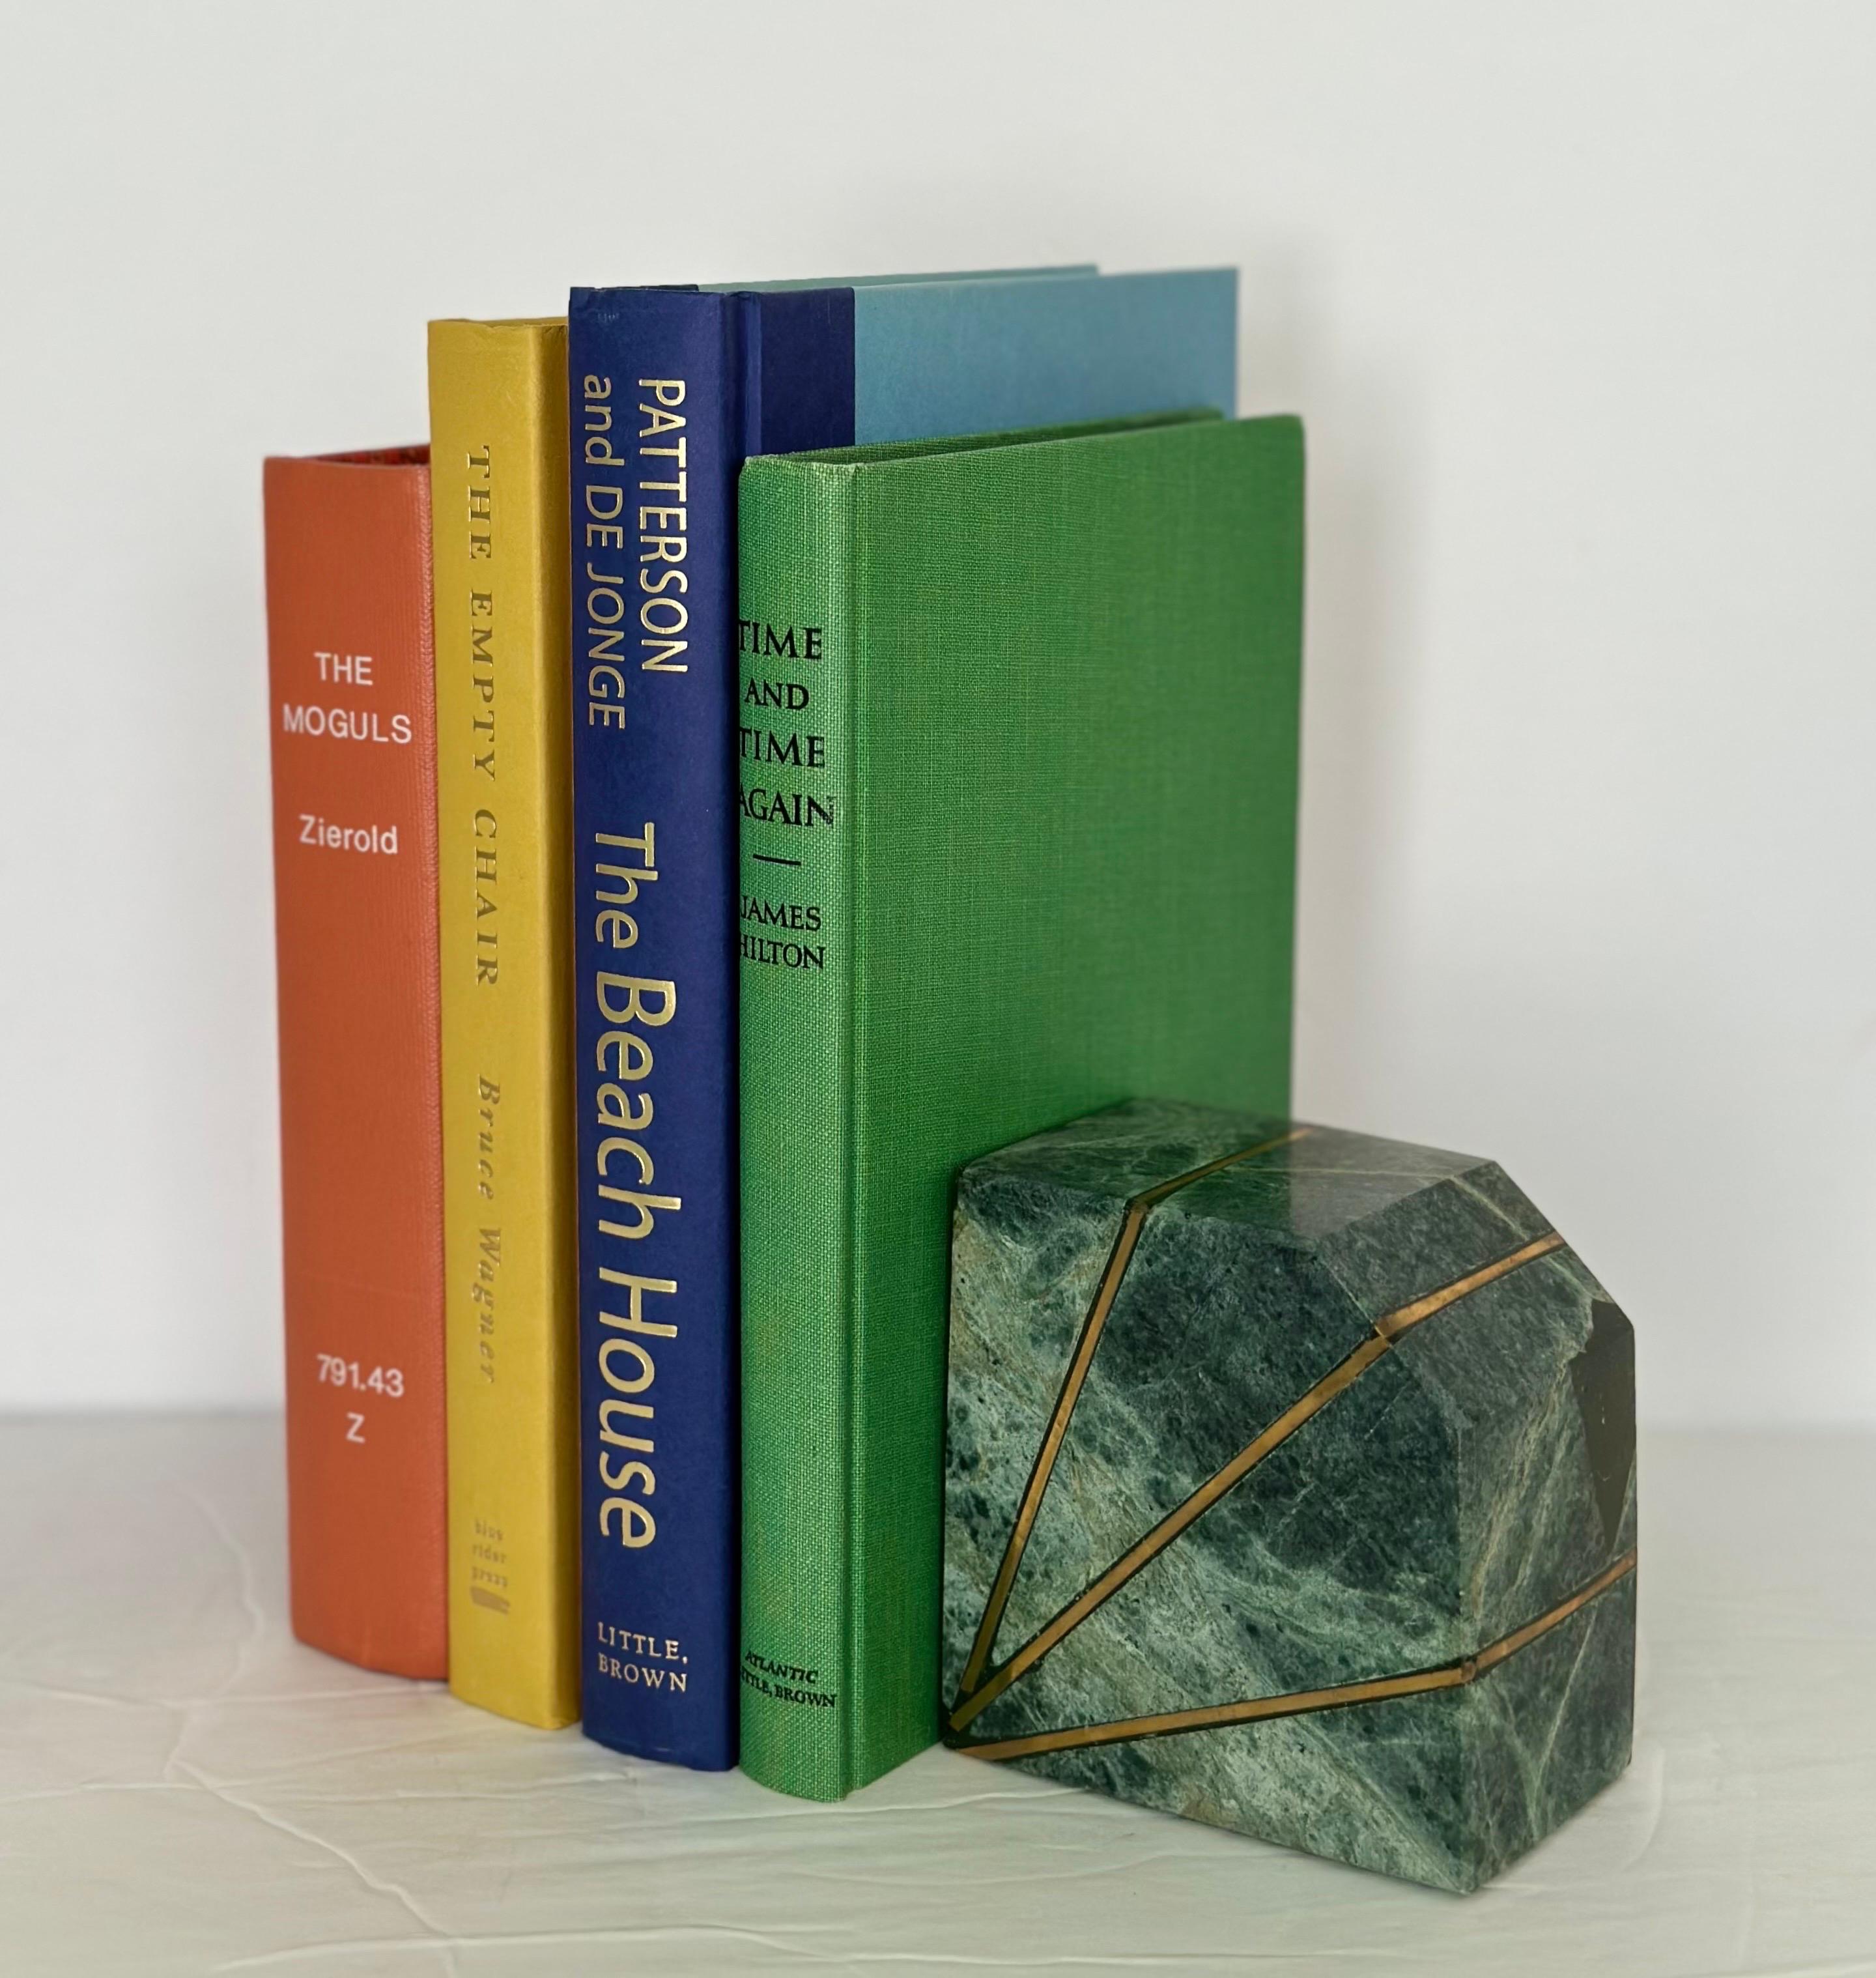 We are very pleased to offer a stunning pair of bookends, circa the 1980s. These sturdy blocks are crafted from green Verde Guatemala marble, a rich and vibrant green stone known for its distinctive veining and depth of color. The pair features